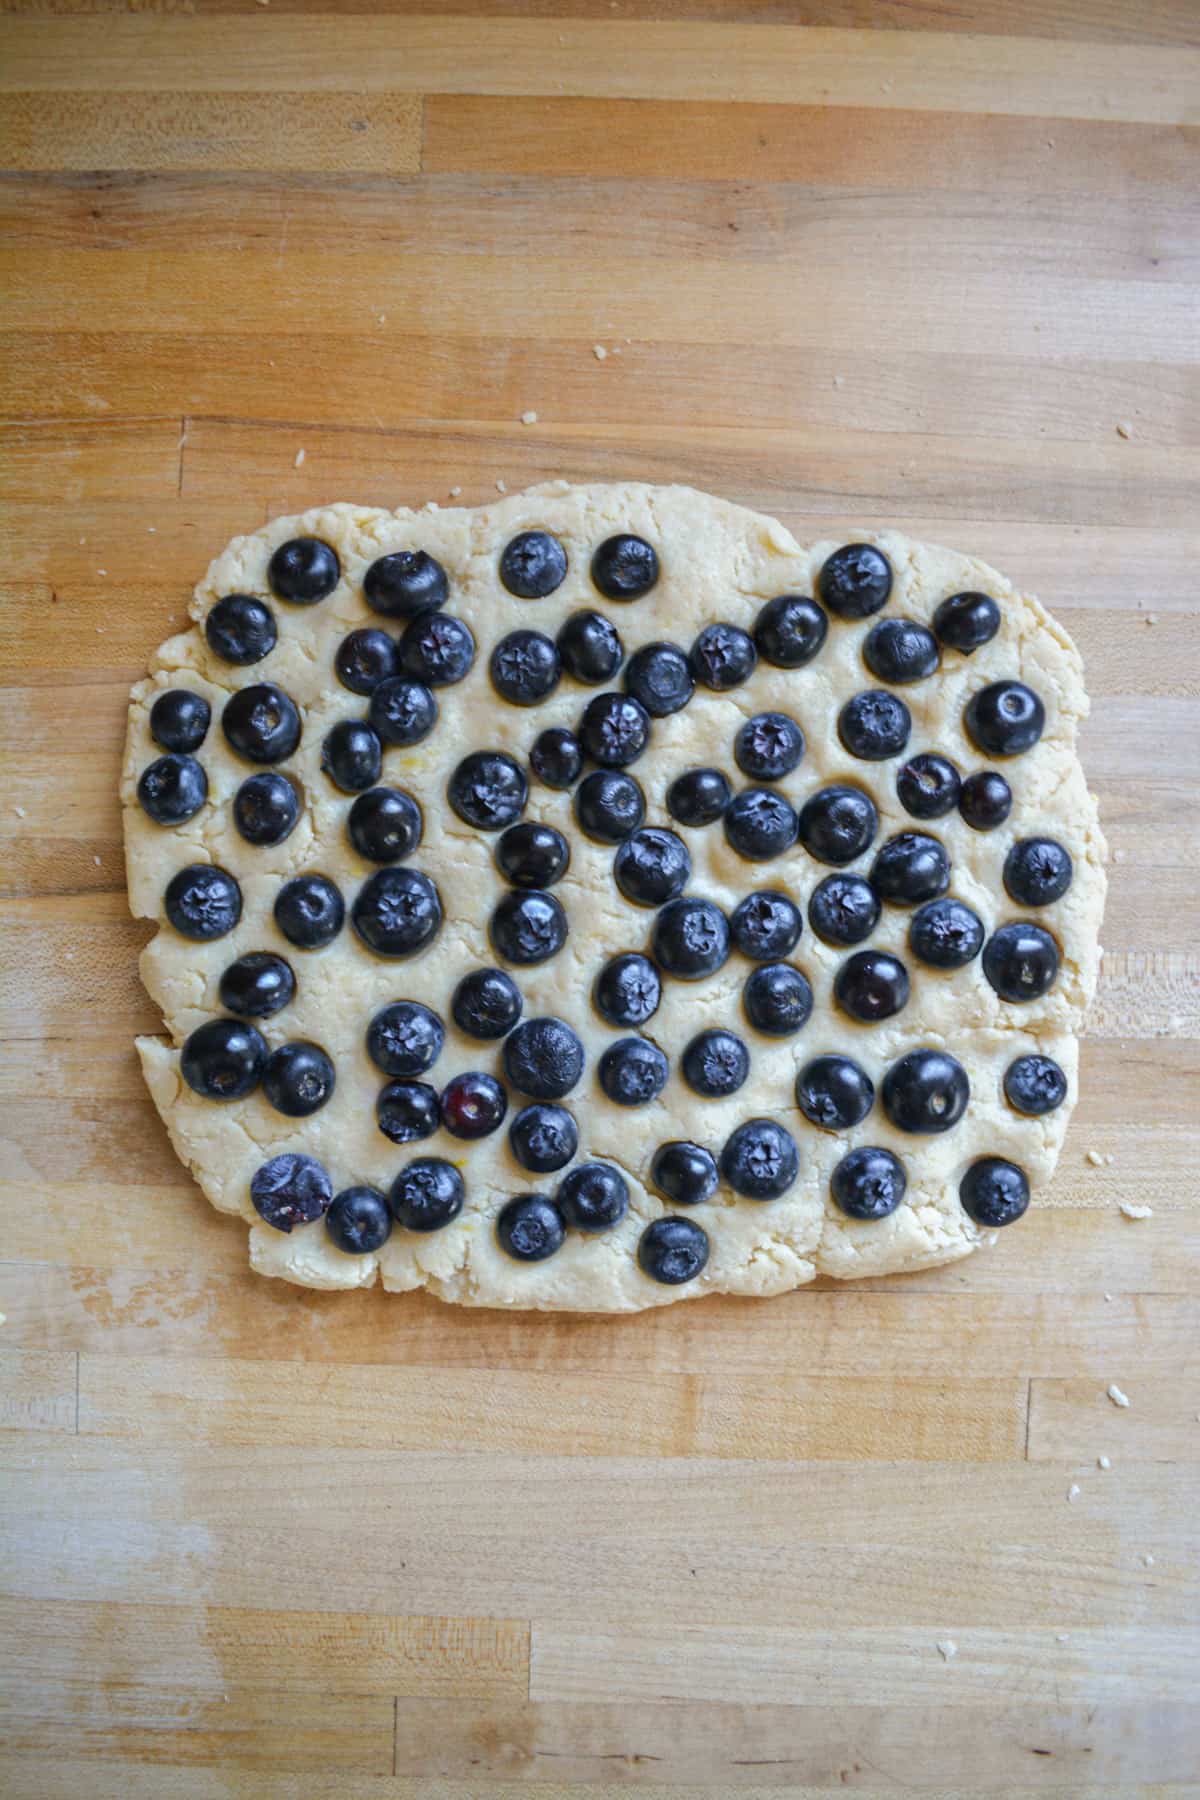 Scone dough pressed into a rectangle with fresh blueberries pressed into the top of the dough.